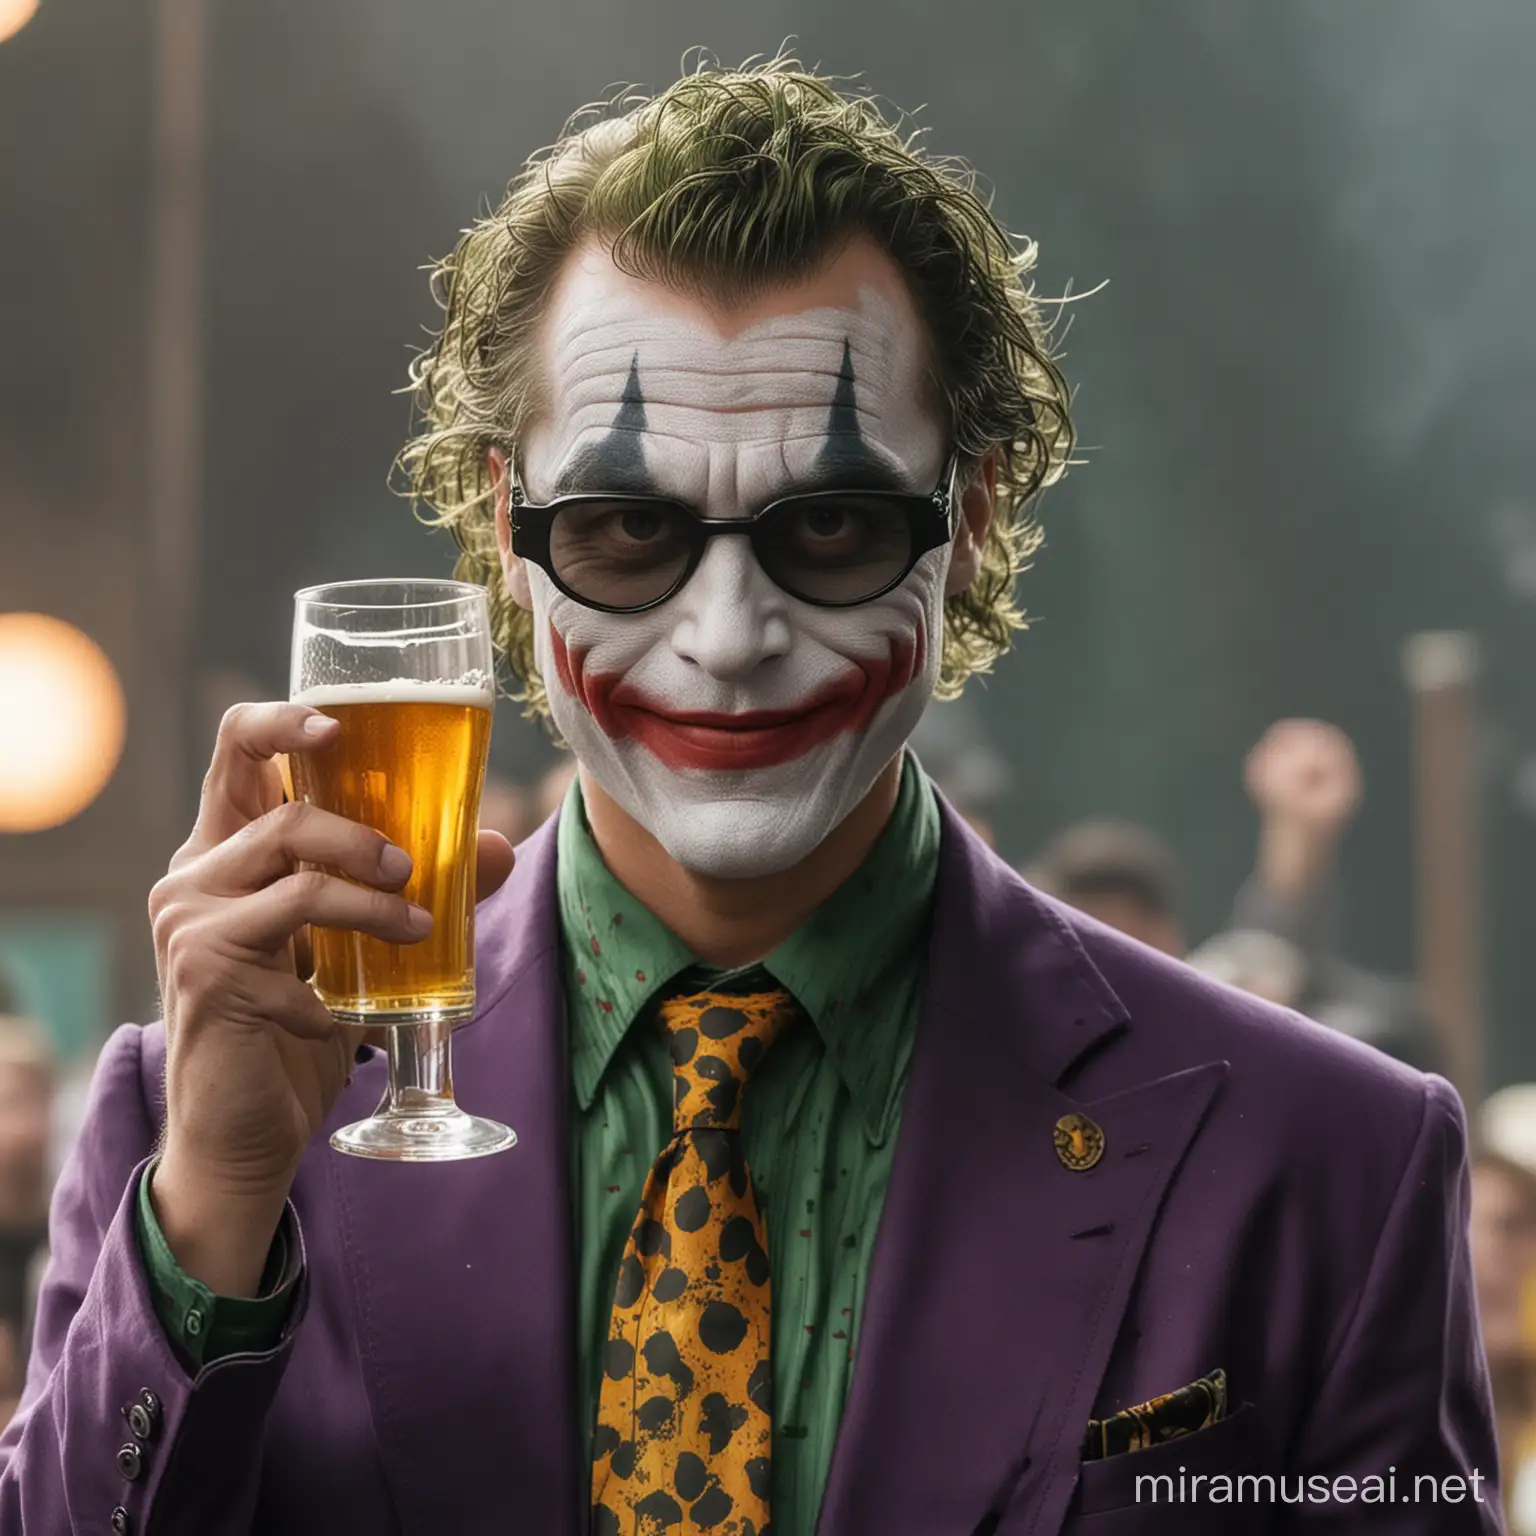 The Joker Wearing Eclipse Glasses and Enjoying a Beer